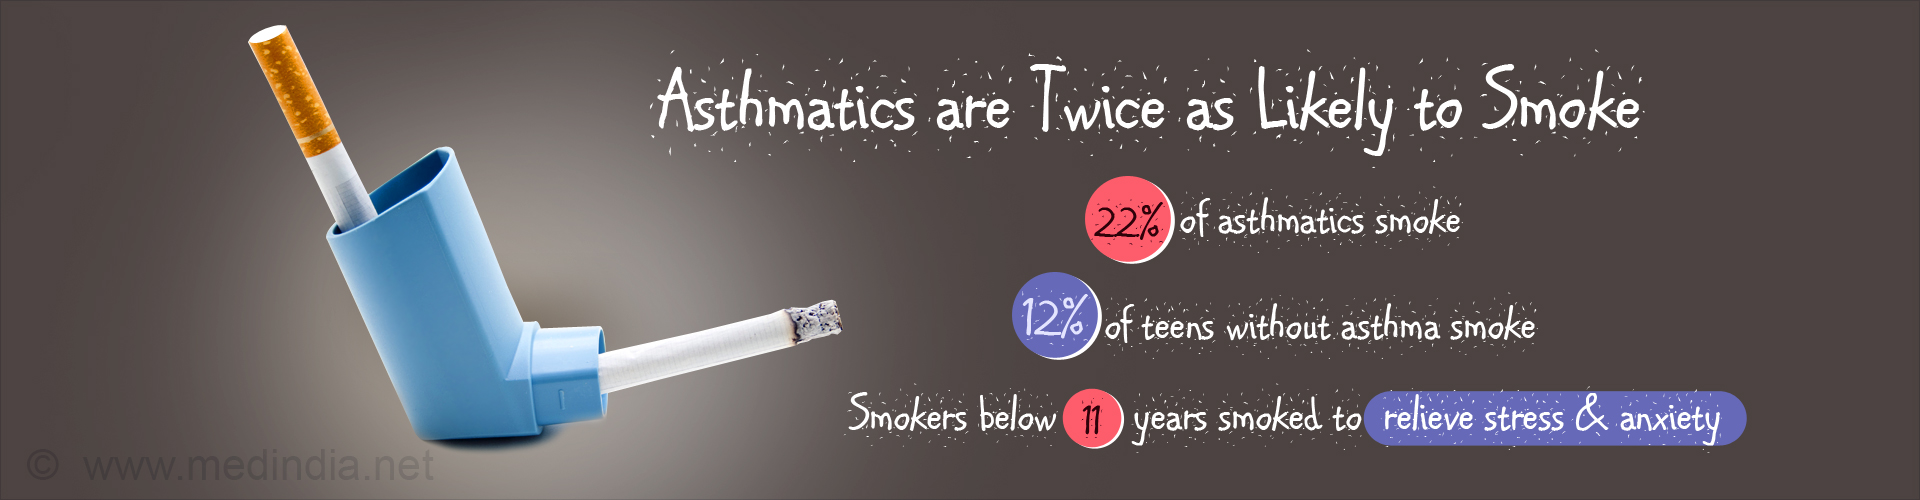 Asthmatics are Twice as Likely to Smoke
- 22% of asthmatics smoke
- 12% of teens without asthma smoke
- Smokers below 11 years smoked to relieve stress & anxiety